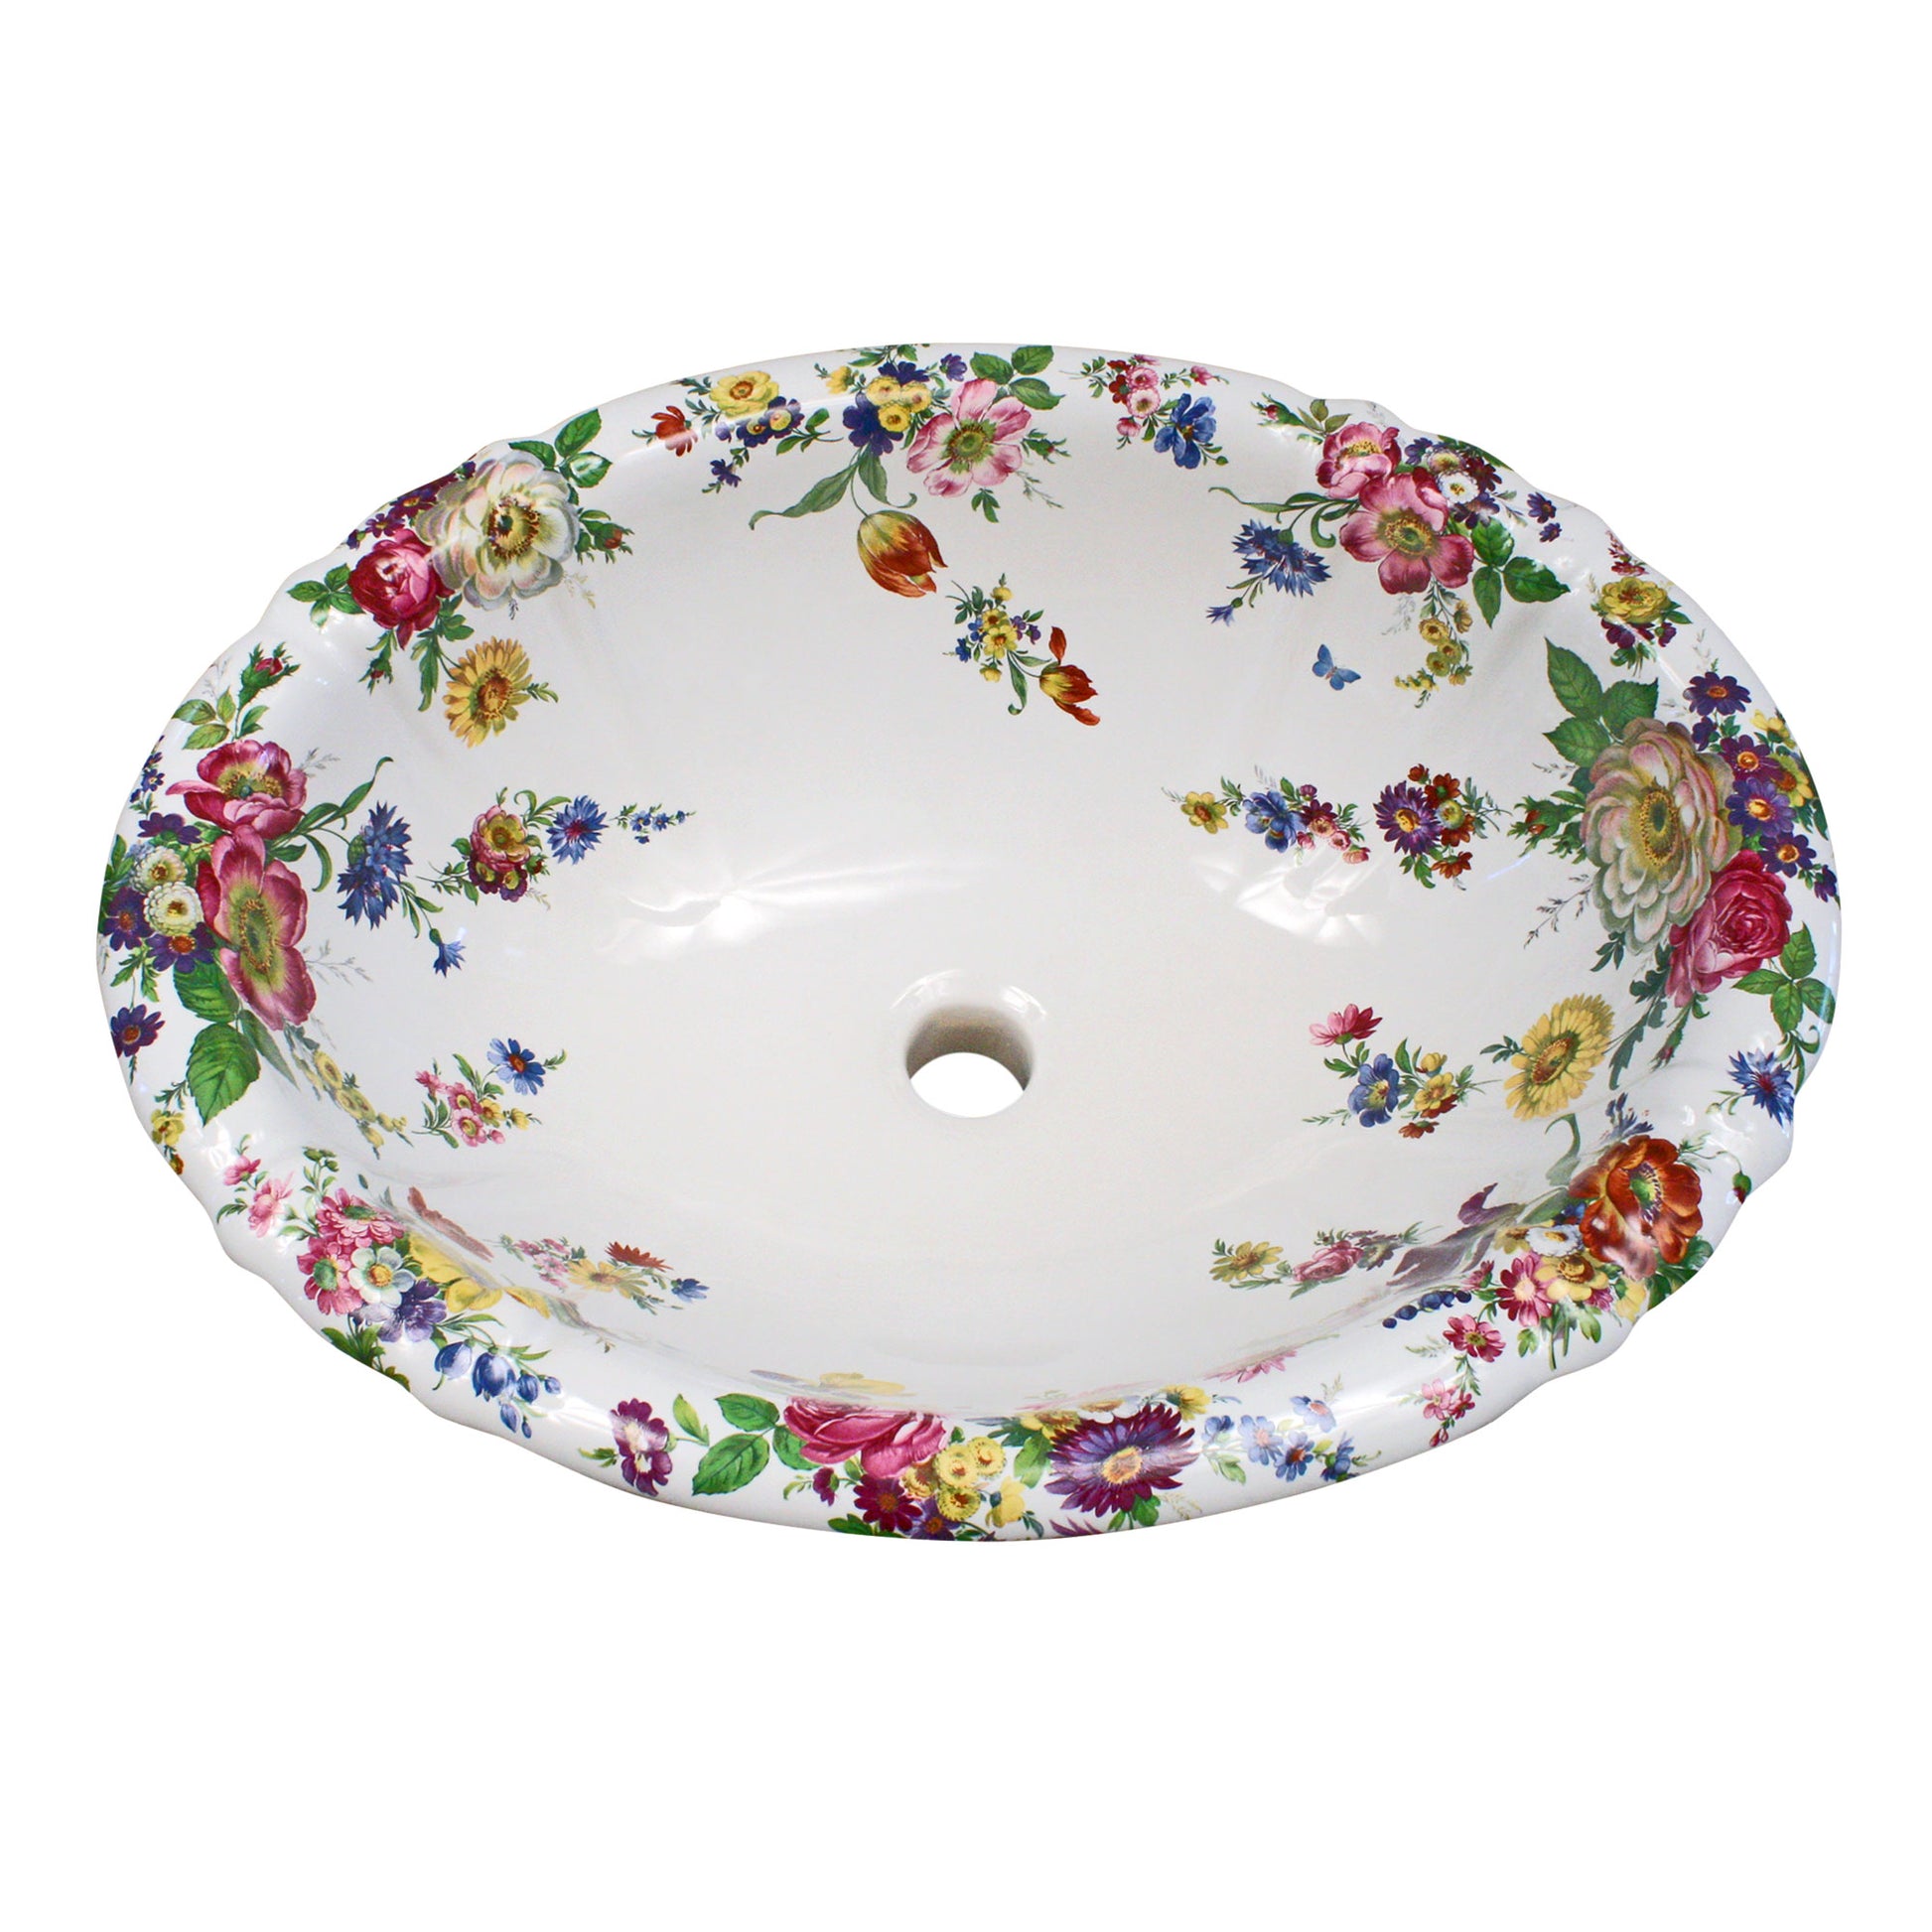 beautiful hand painted bathroom sink painted with flowers and butterfly